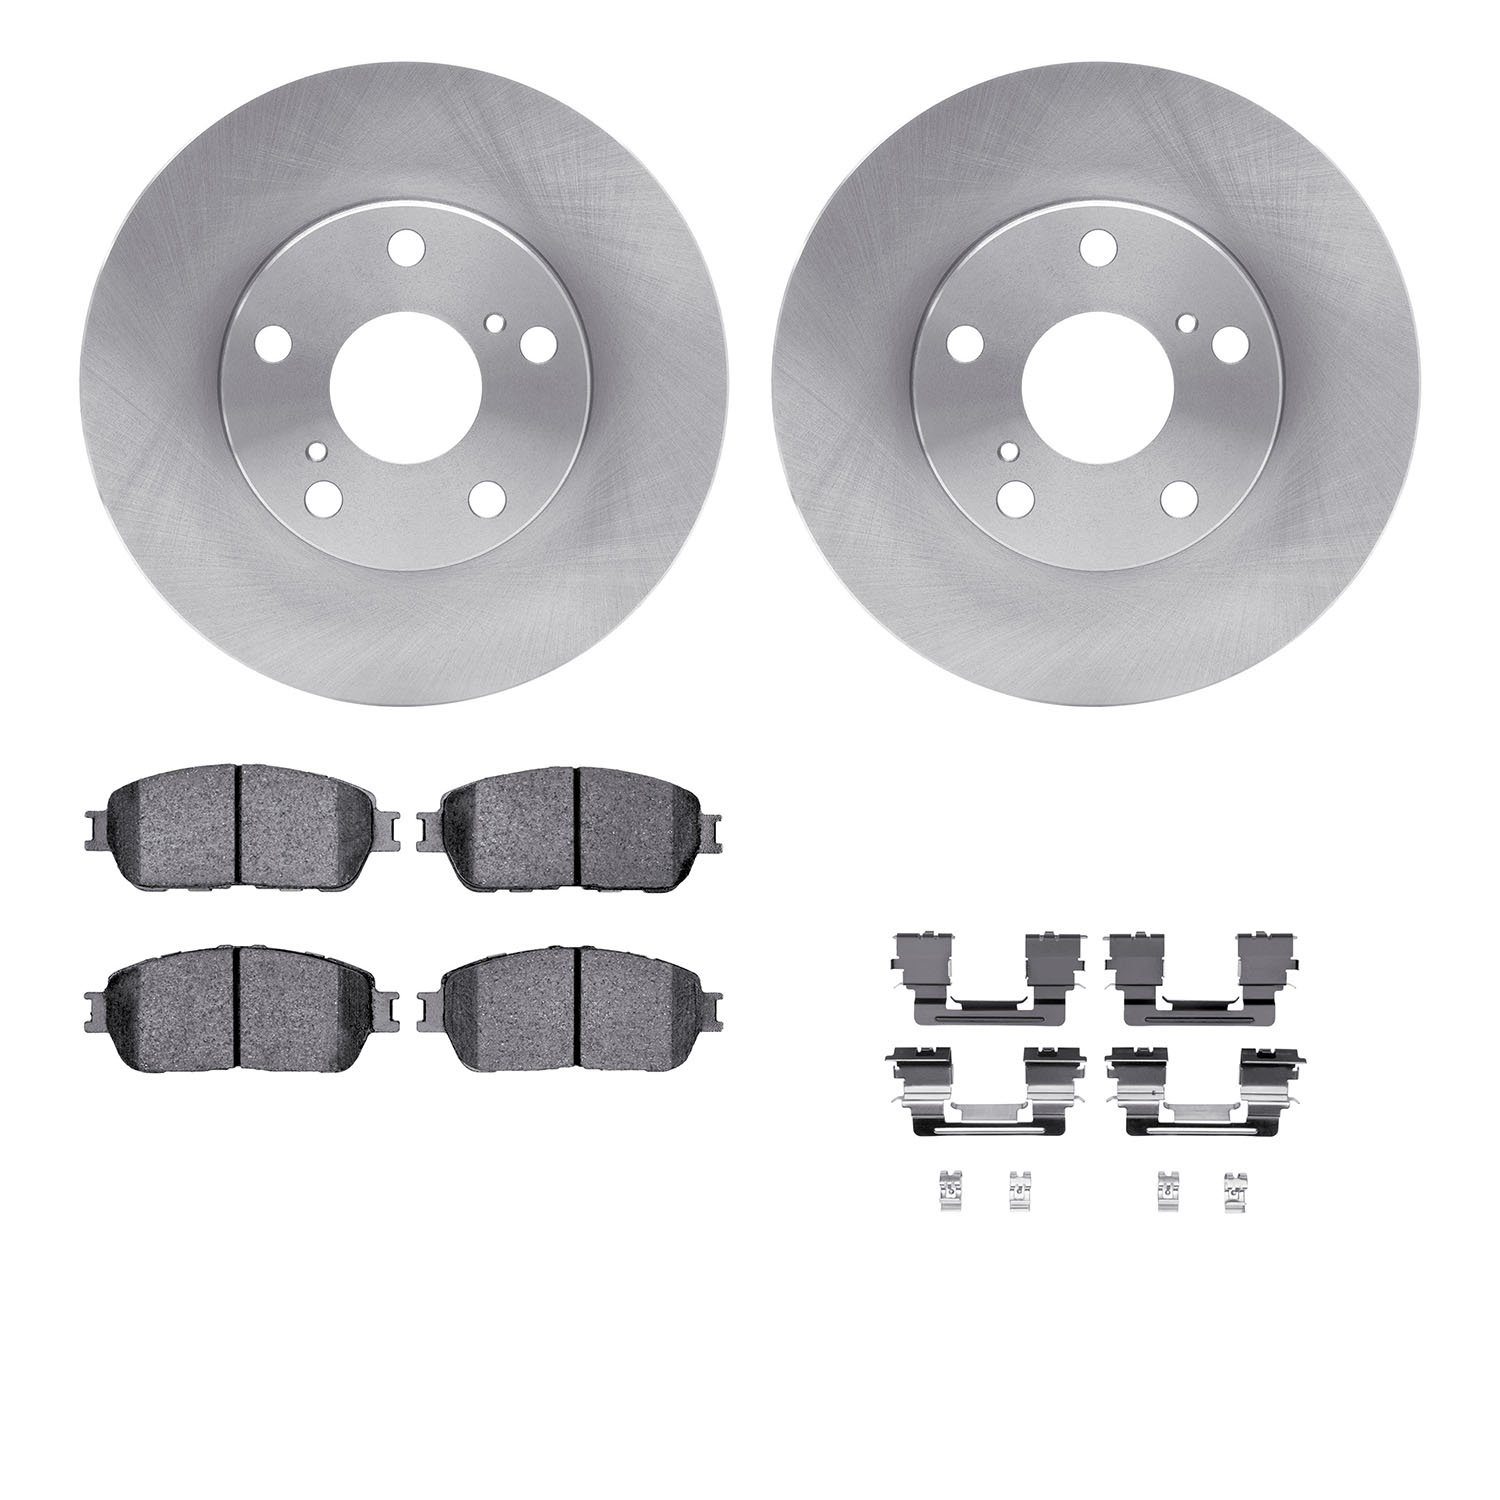 6412-76052 Brake Rotors with Ultimate-Duty Brake Pads Kit & Hardware, 2005-2015 Lexus/Toyota/Scion, Position: Front